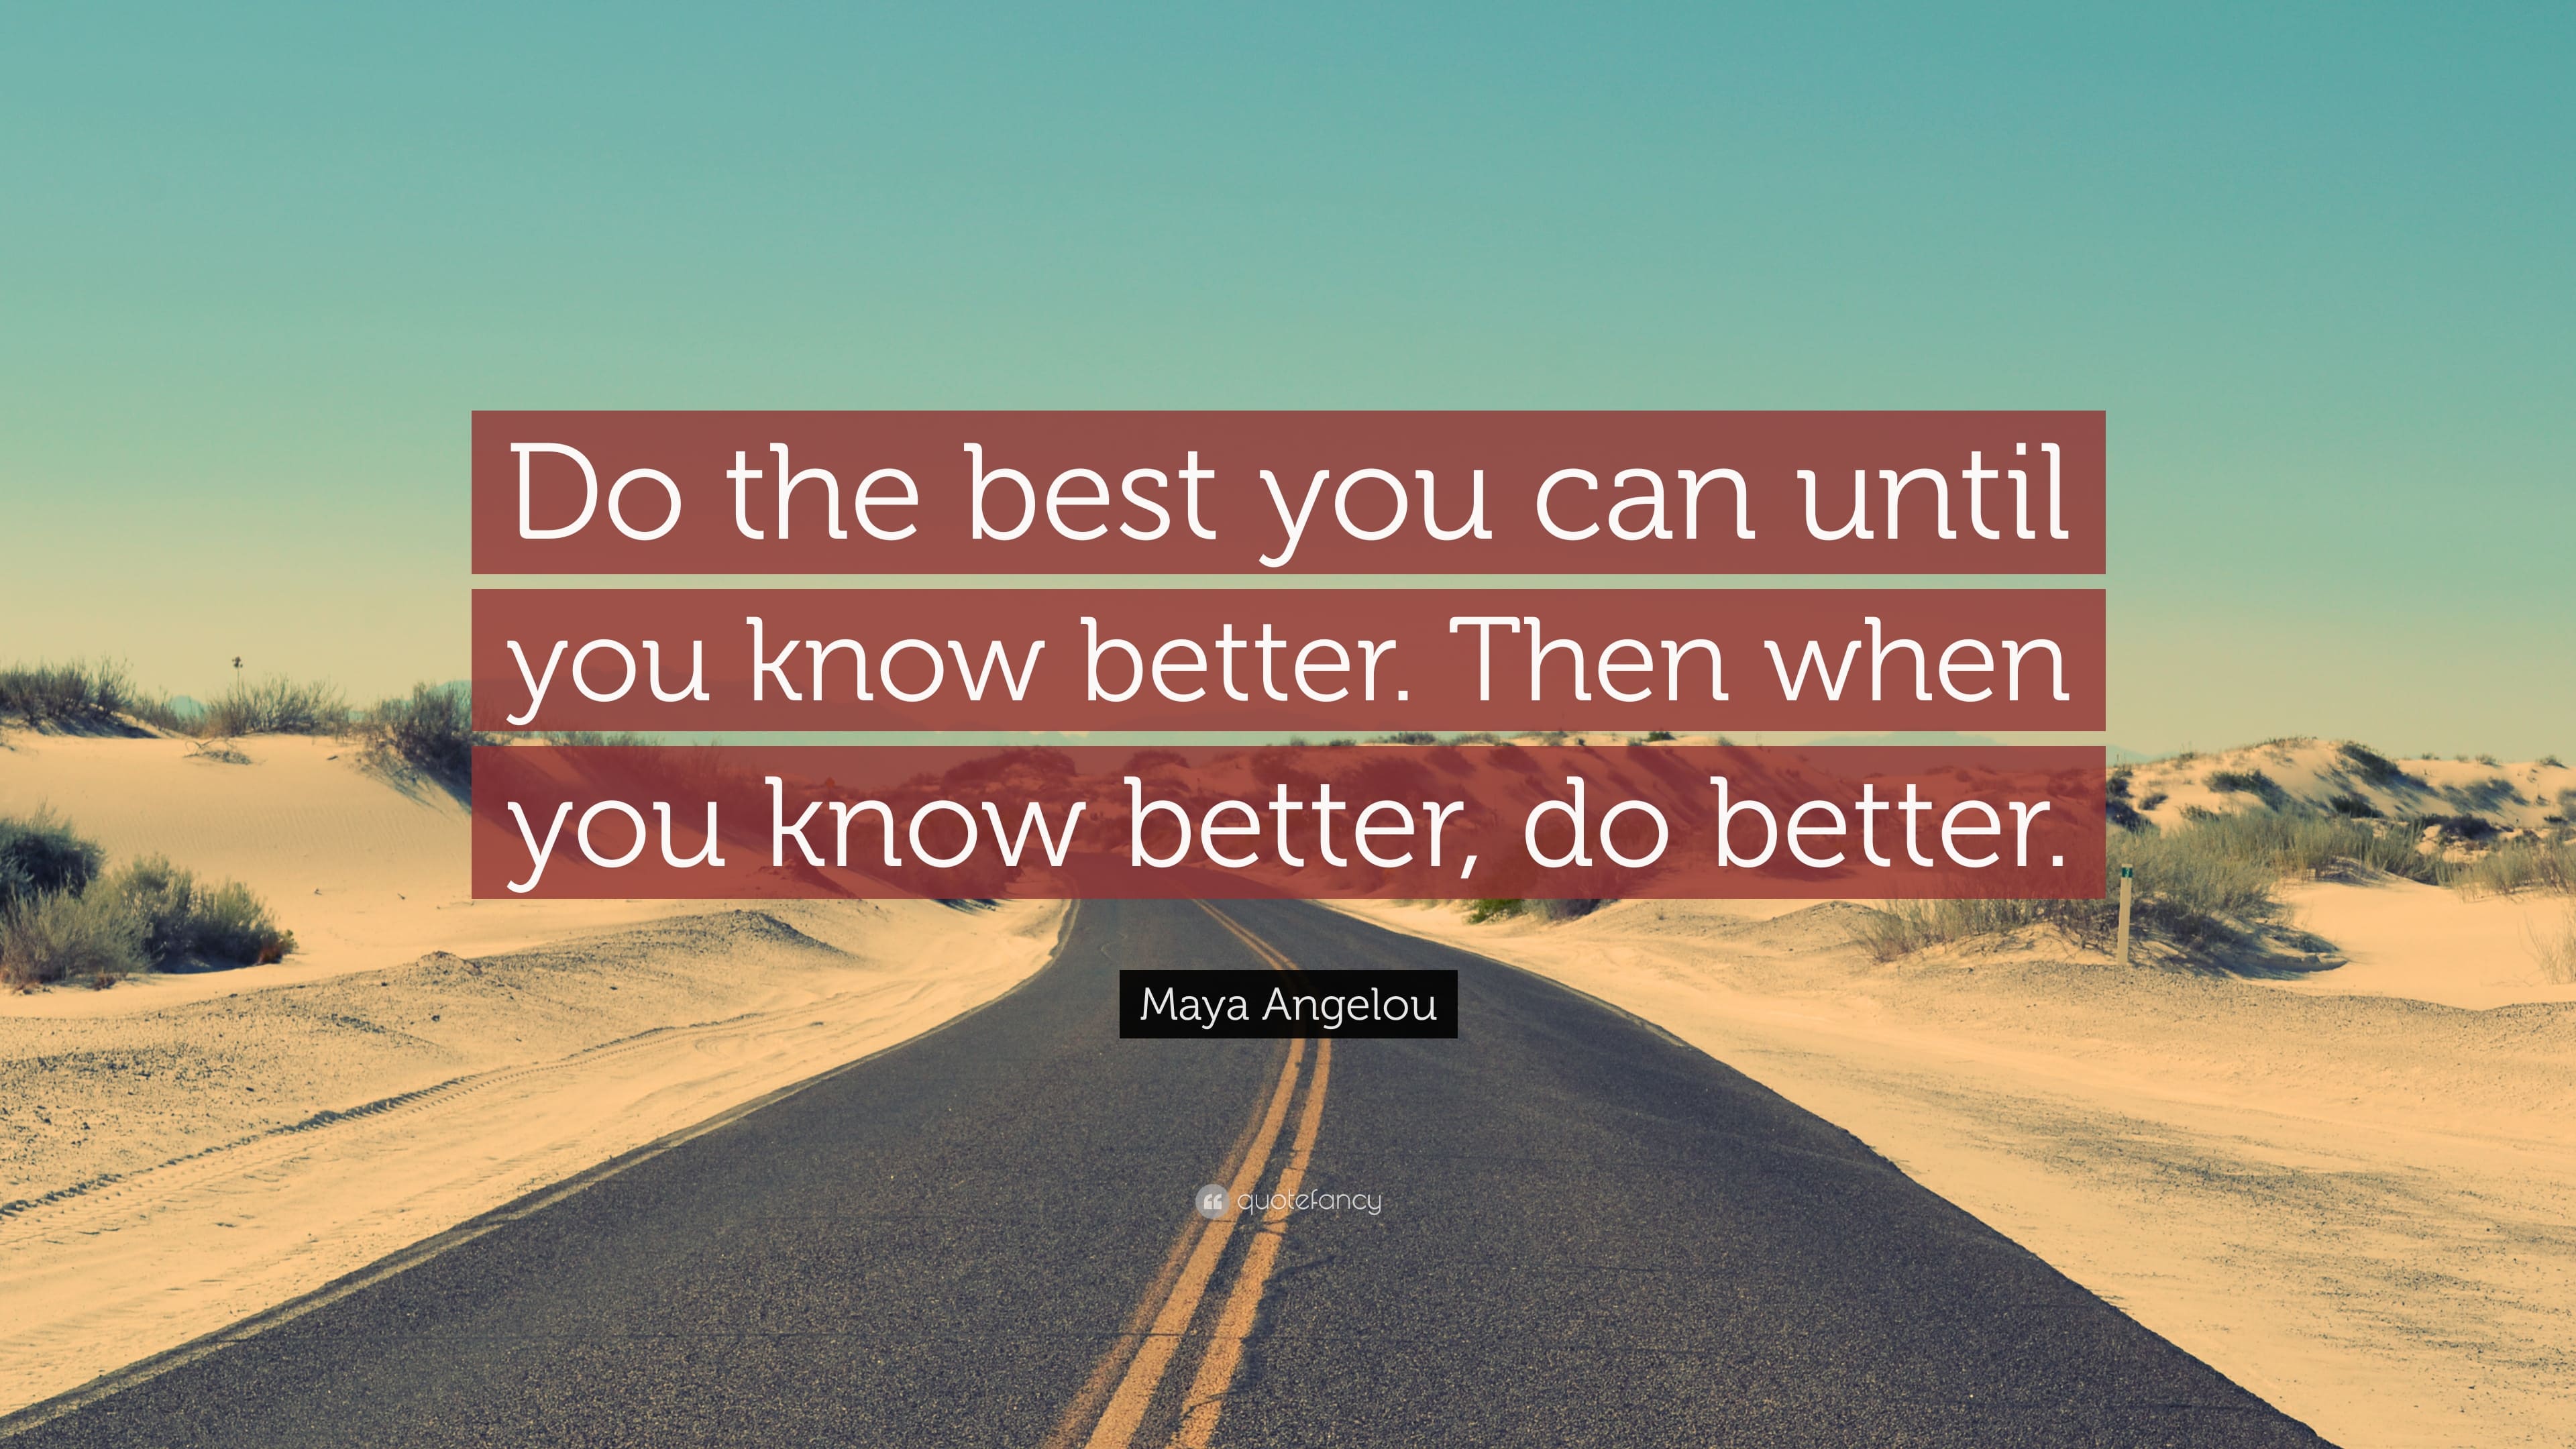 How to be better